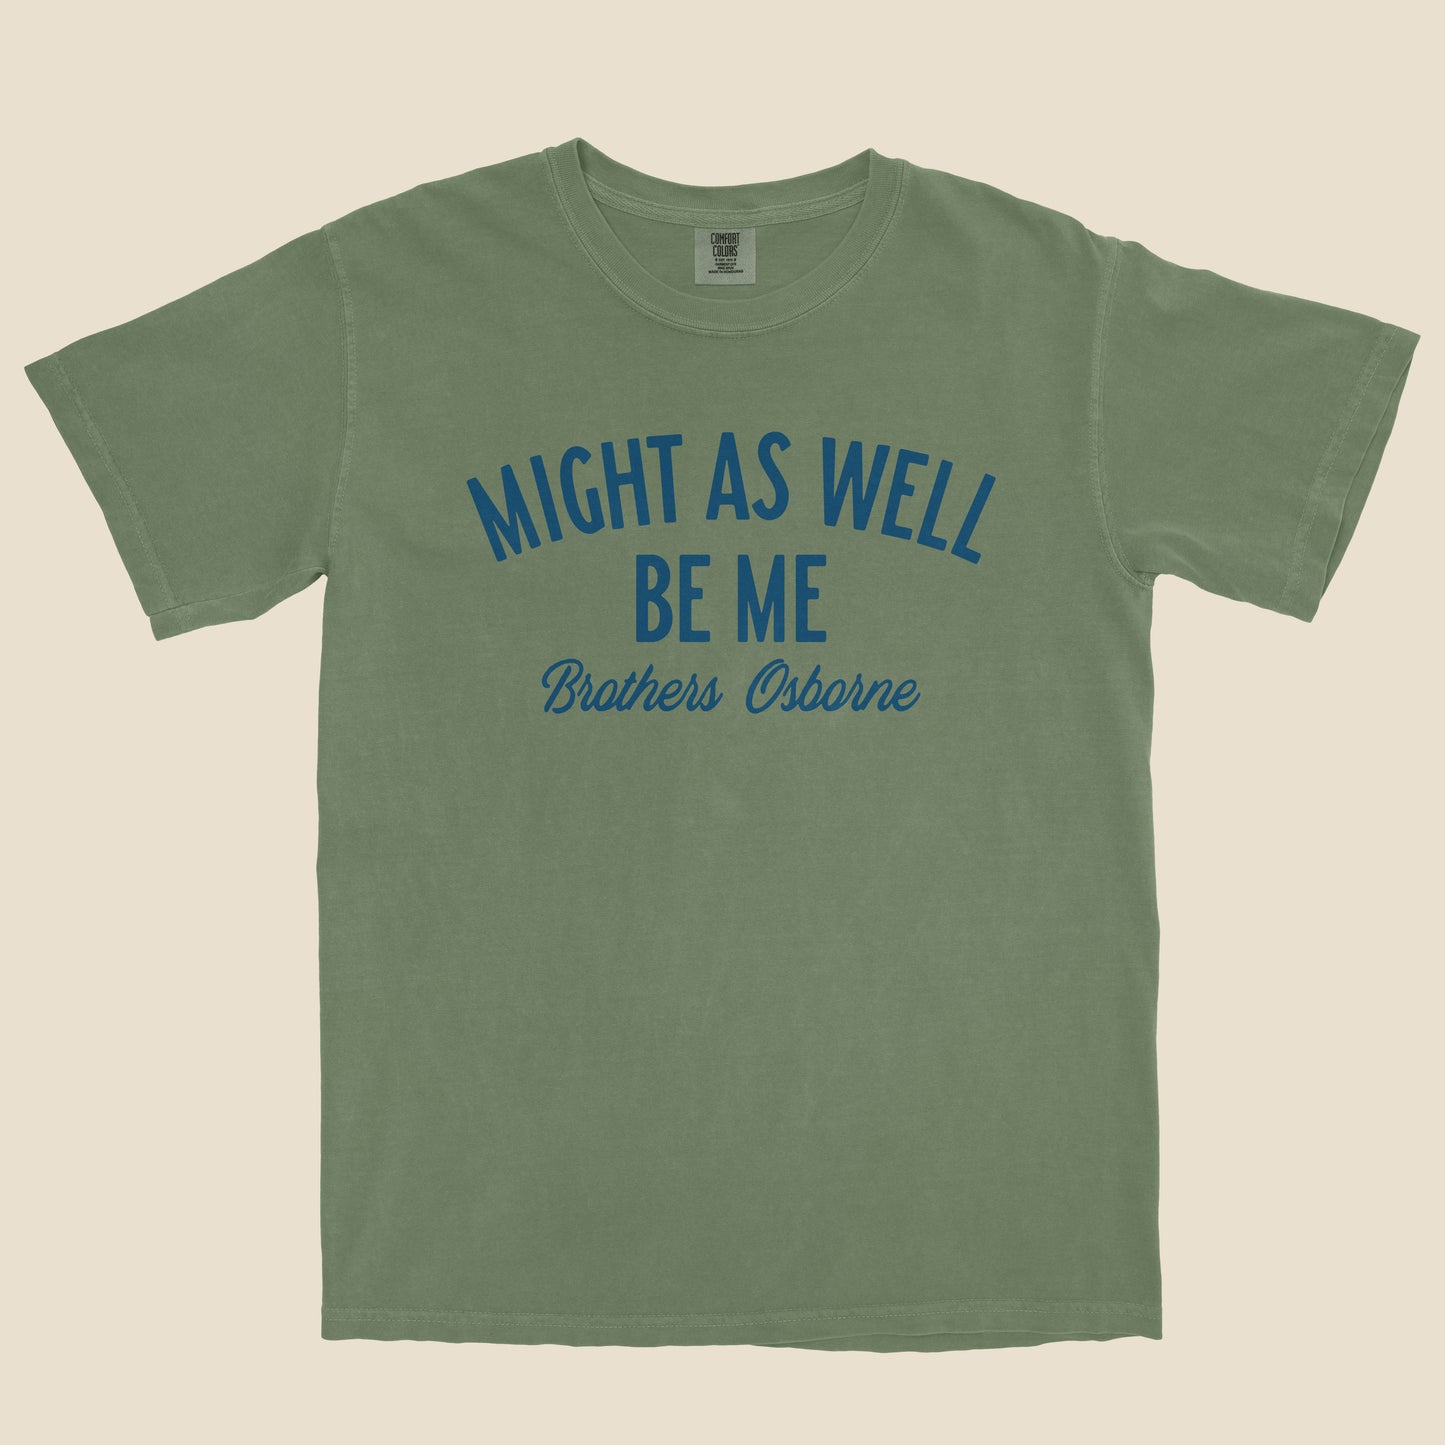 Might As Well Be Me - Green Tee